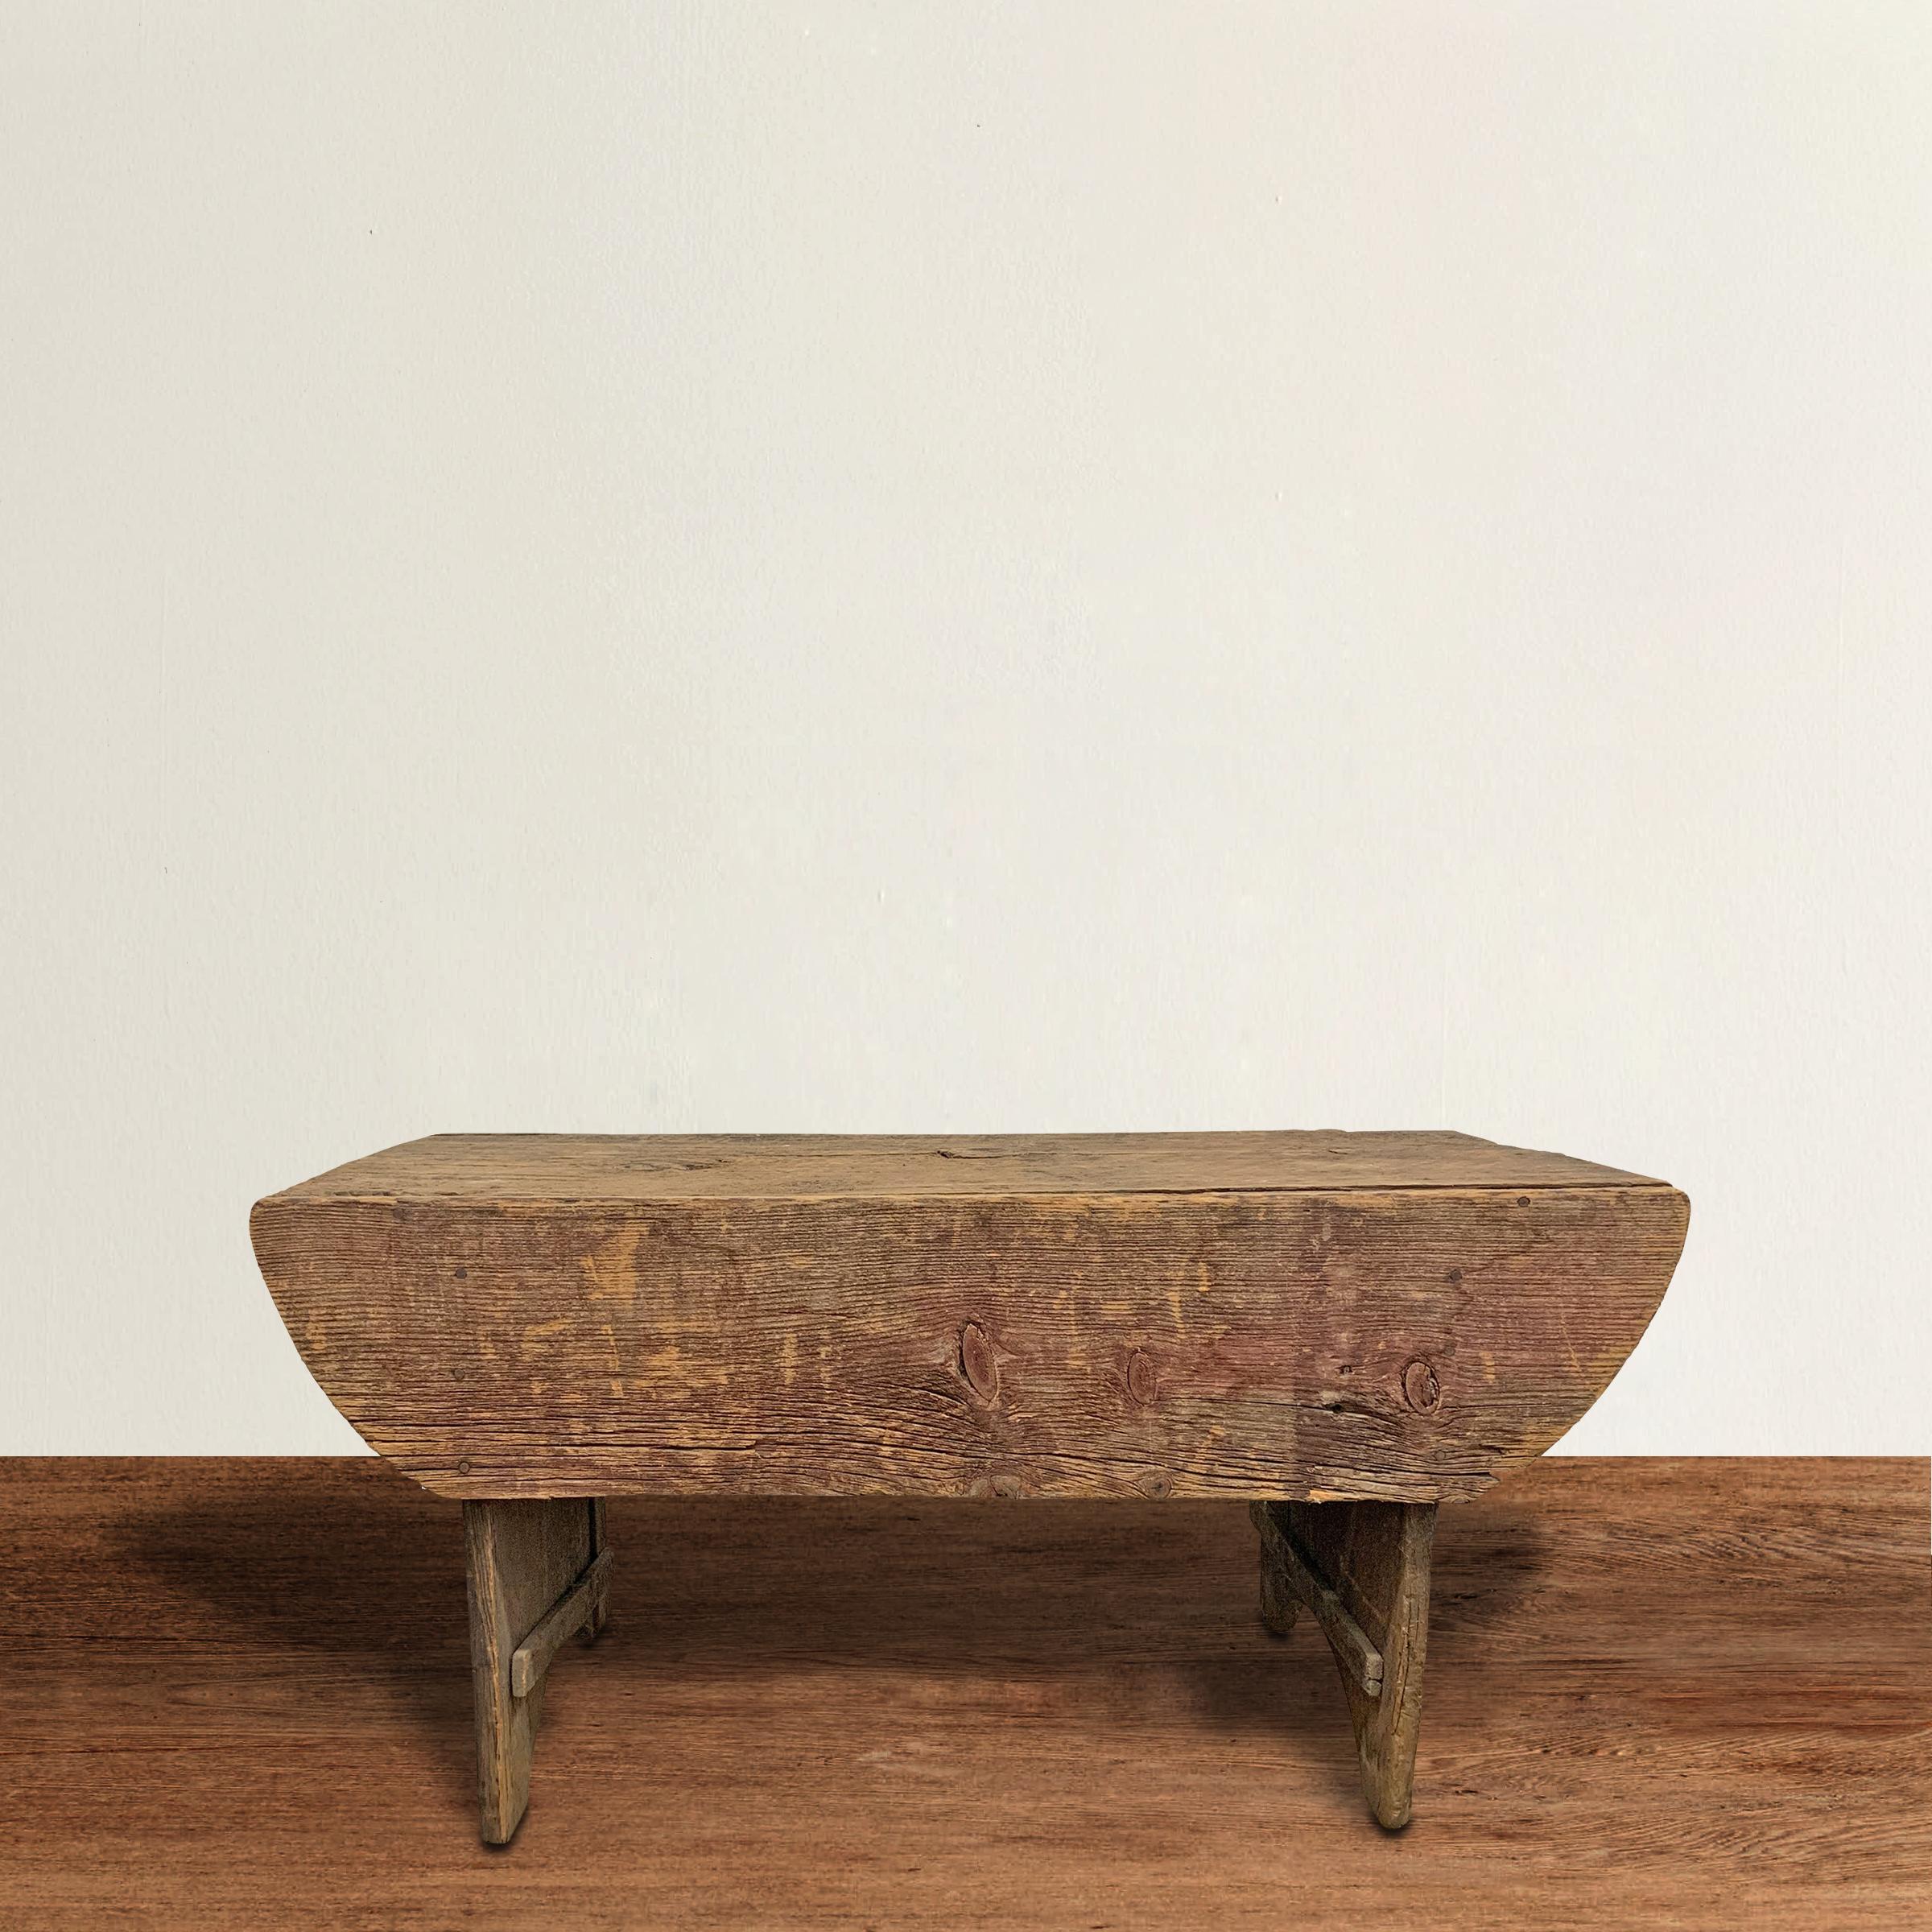 A wonderful early 19th century American bench or low table of simple construction with a solid plank top and solid plank legs with semi-circular cutout. Bench retains some of its original red paint.